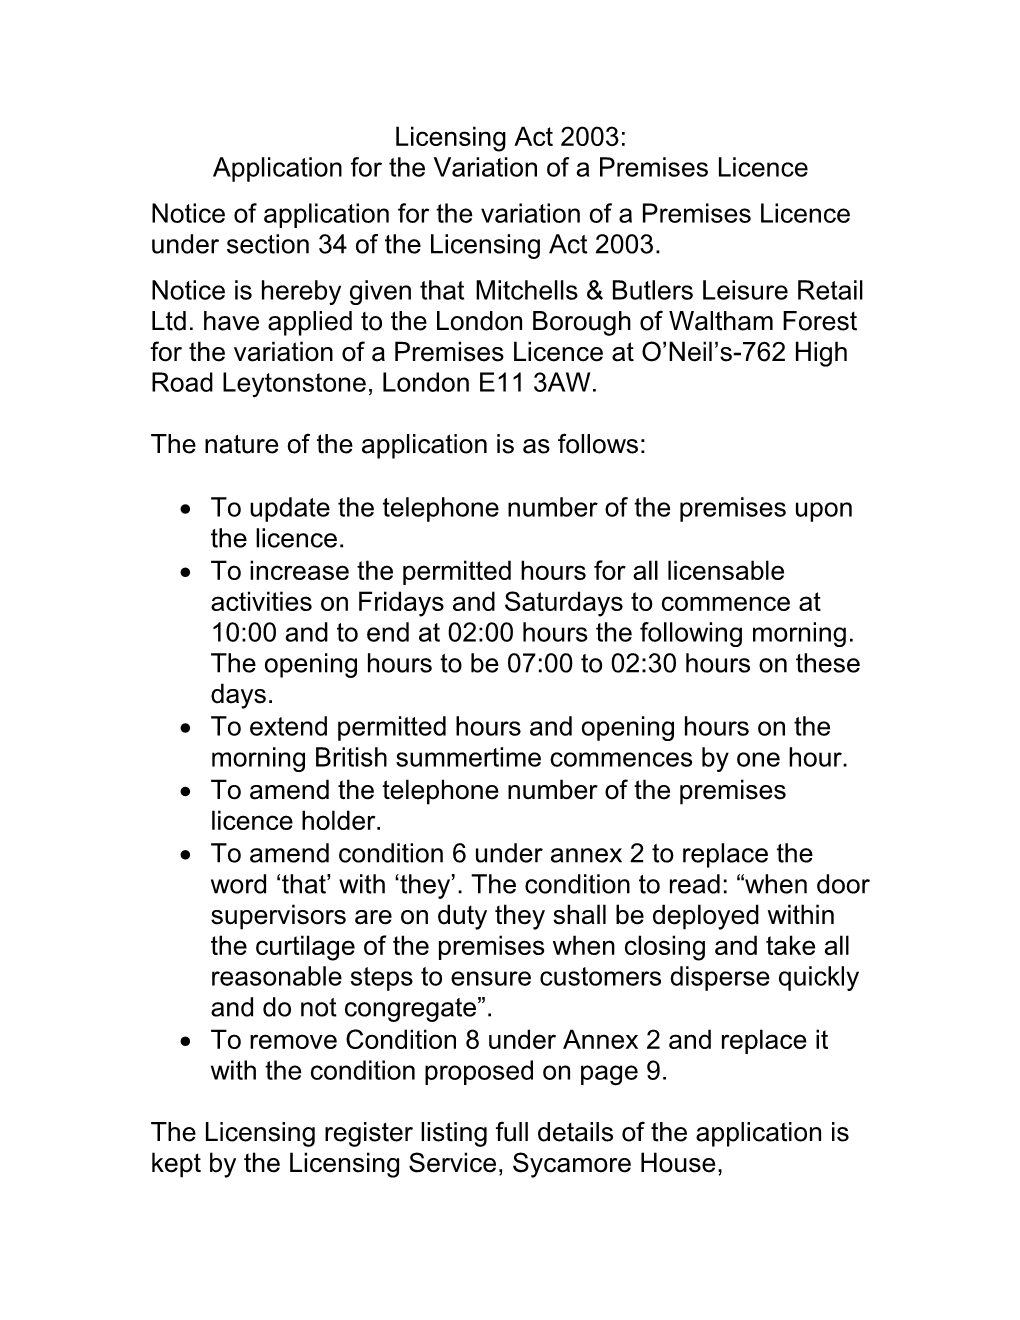 Application for the Variation of a Premises Licence